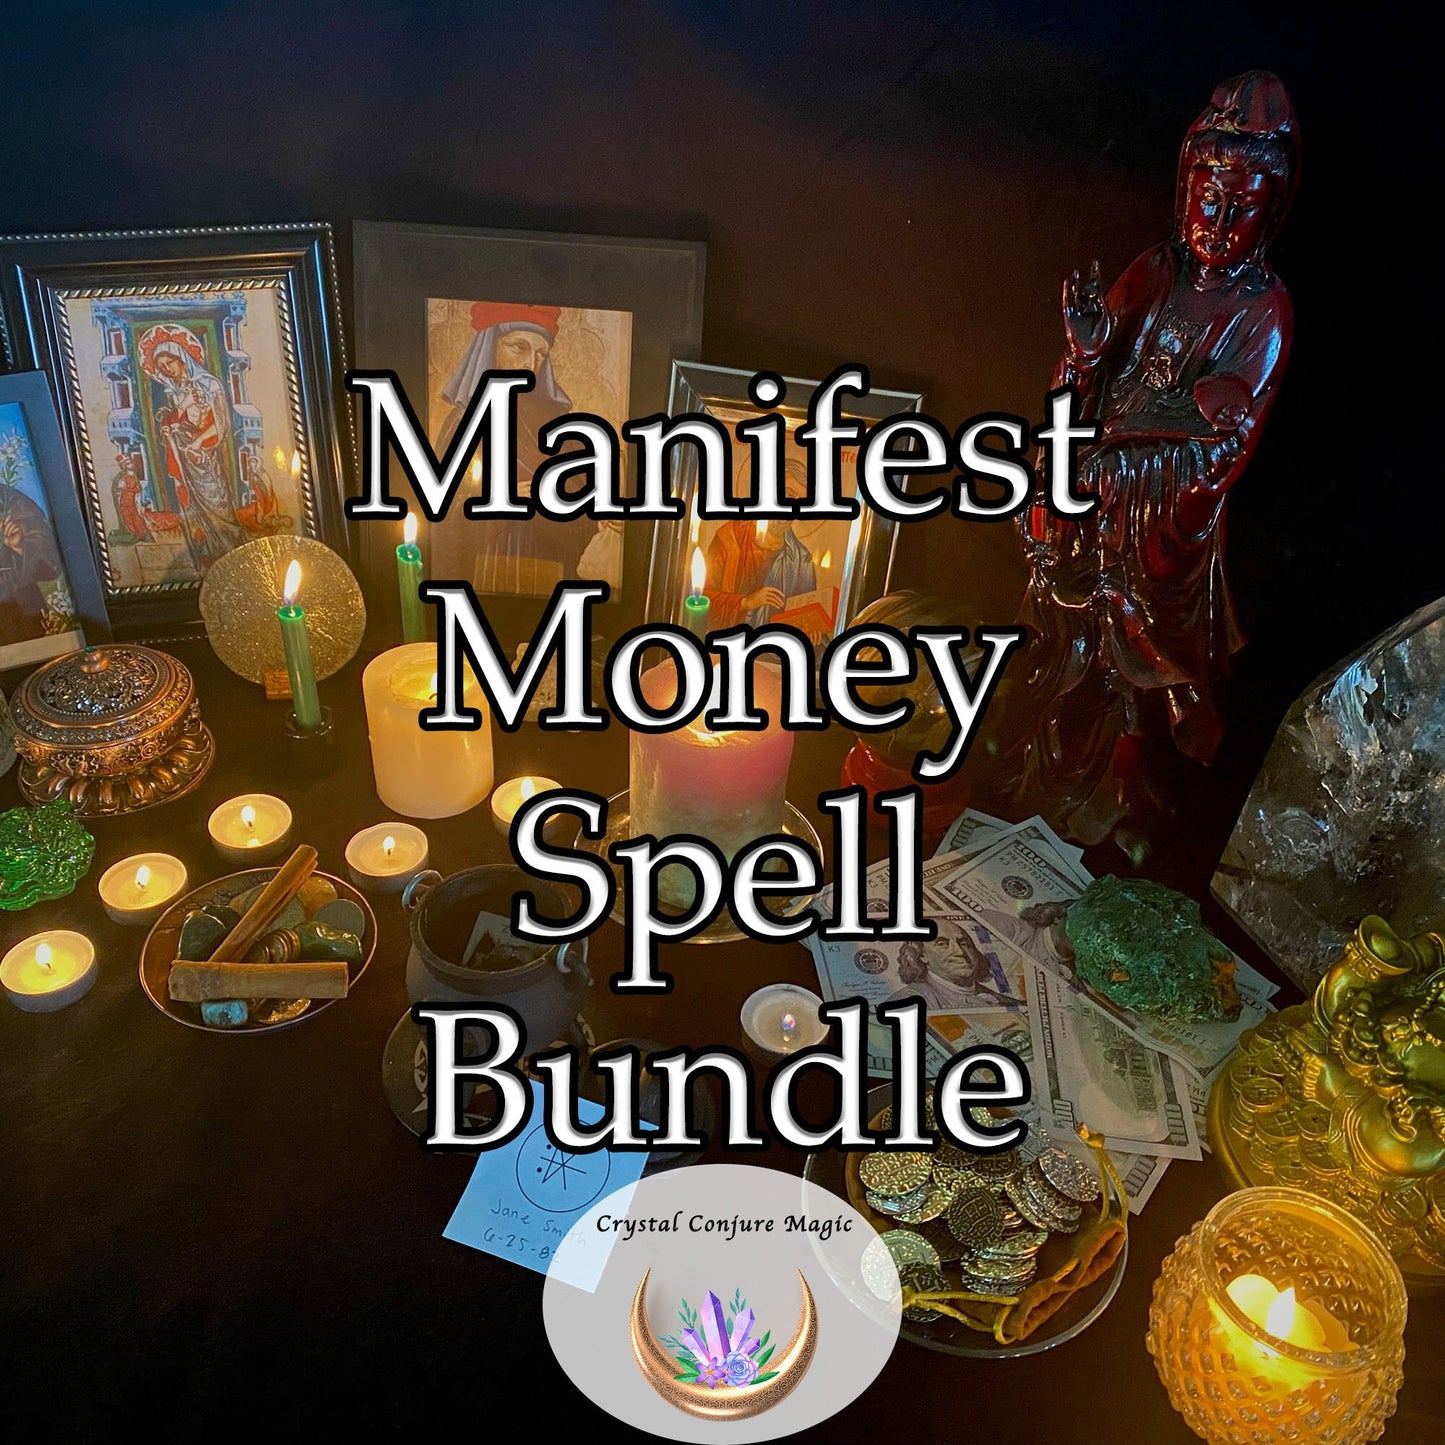 Manifest Money Spell Bundle 1 - The fast economical way to find cash and start building prosperity for your future